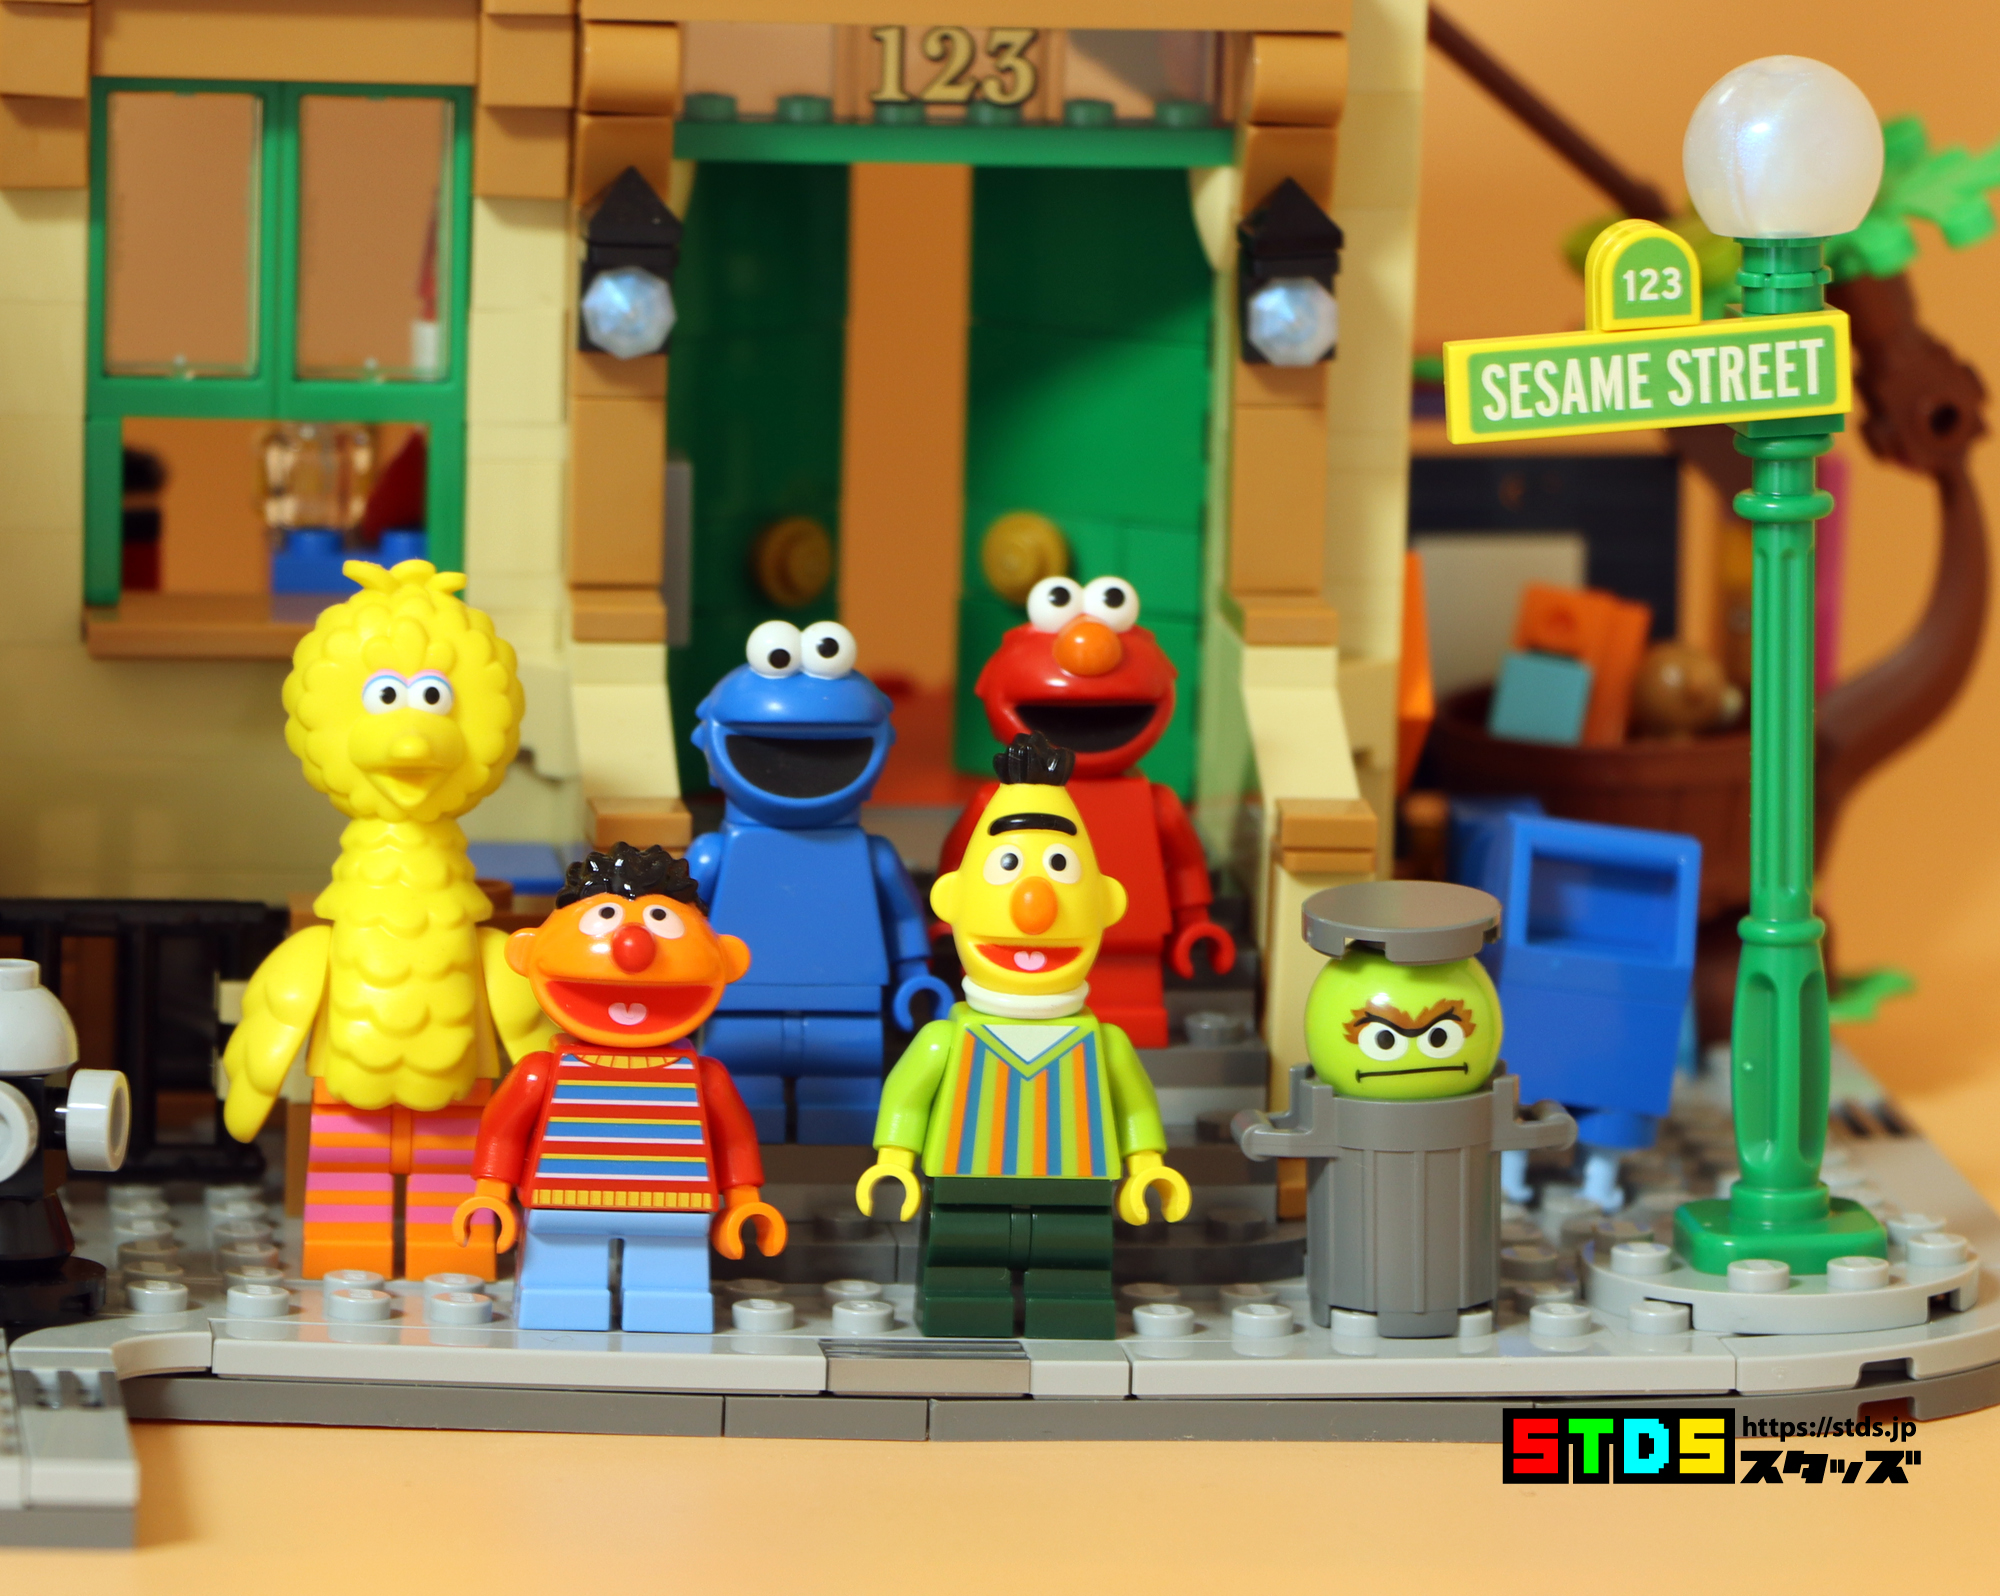 LEGO 21324 Sesame Street Review with Jason Statham and a Cat